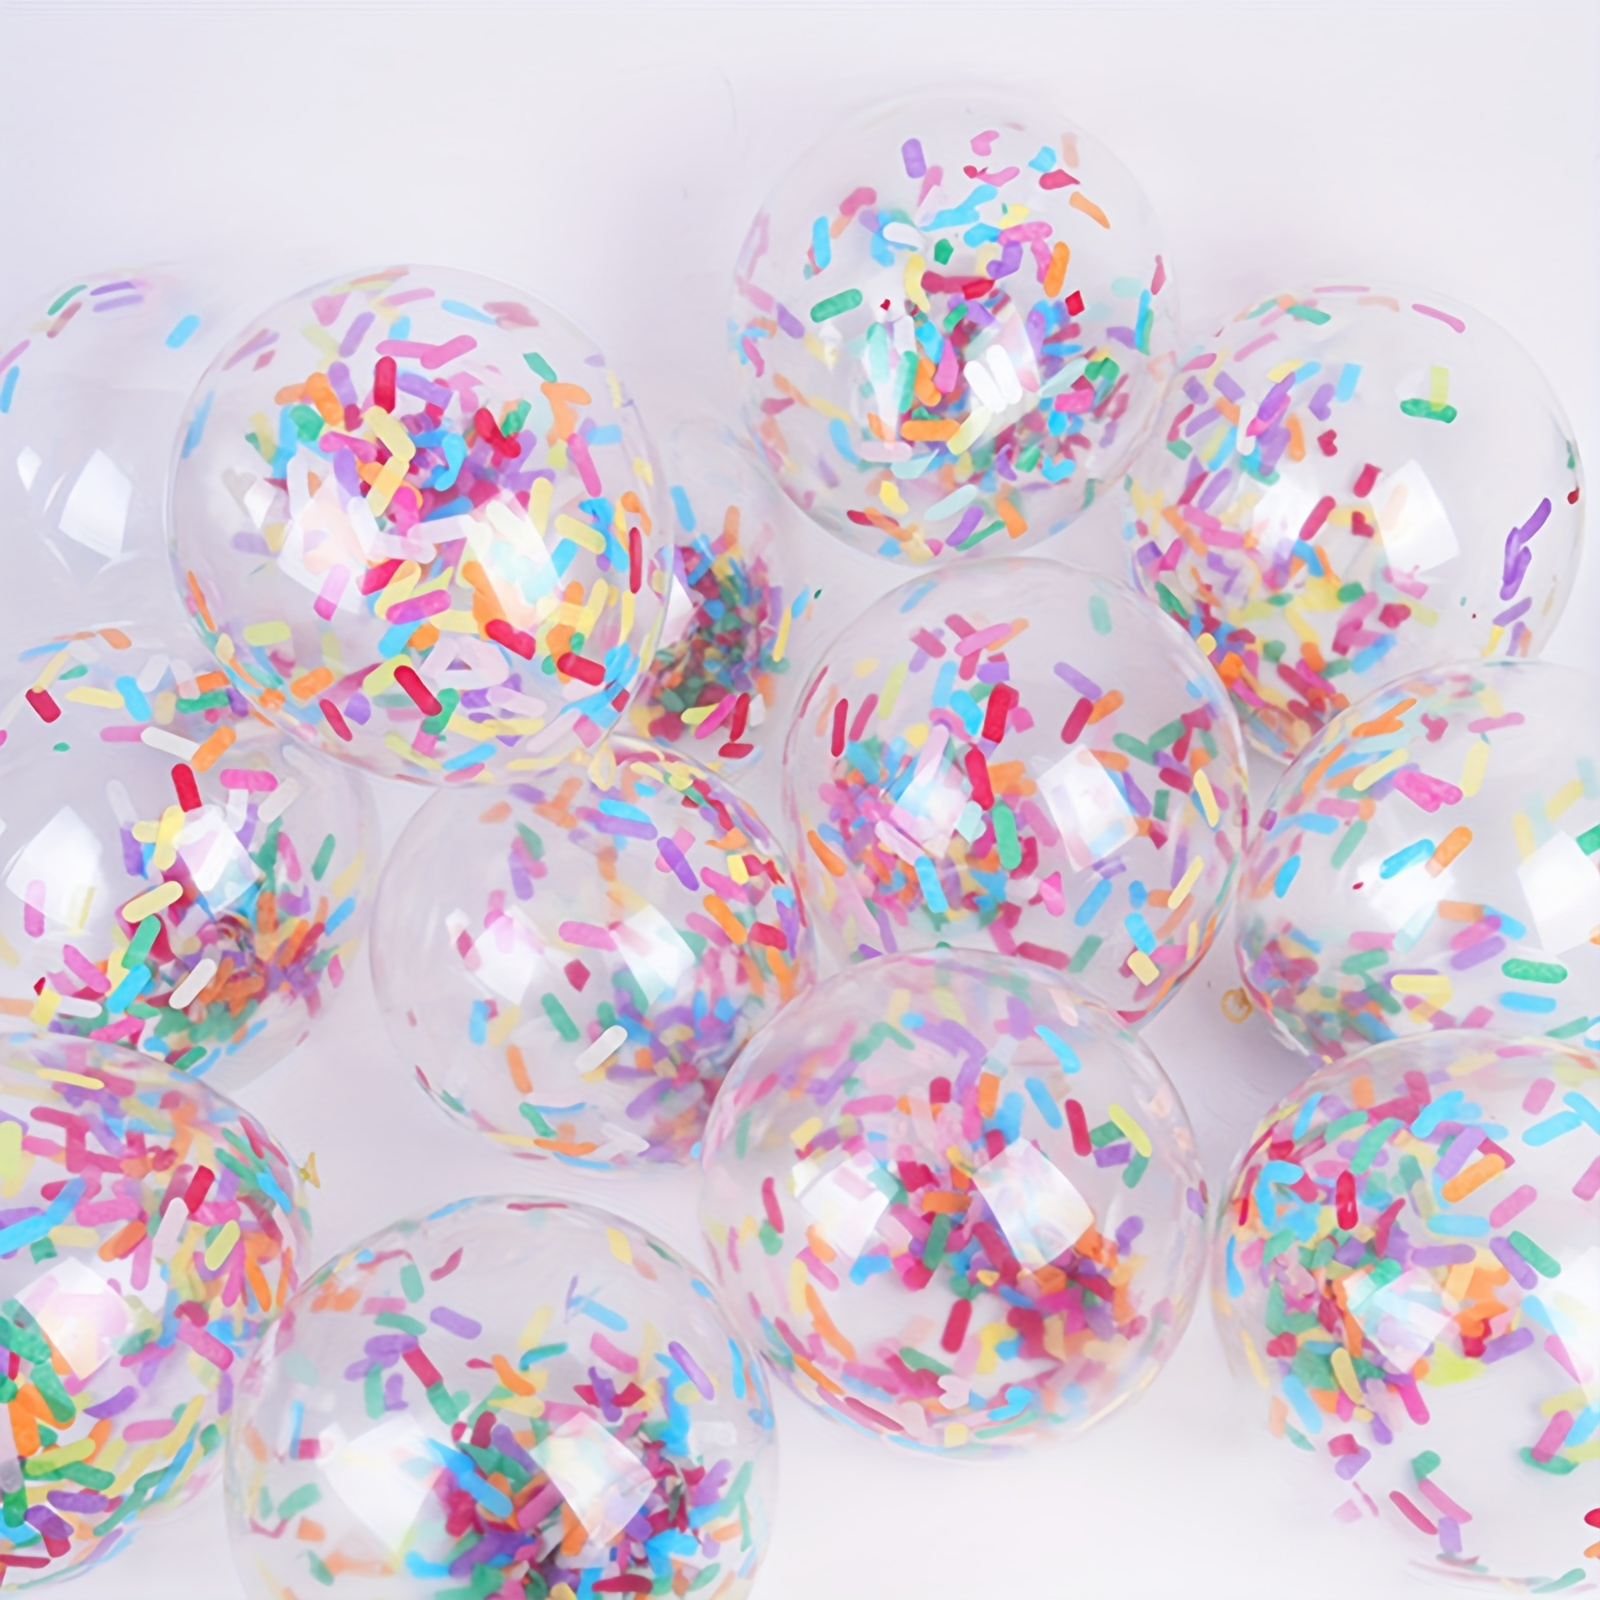 

10-piece Vibrant Ice Cream Confetti Balloons - Ideal For Birthdays, Holidays & Photo Props, Perfect For Parties & Home Decor